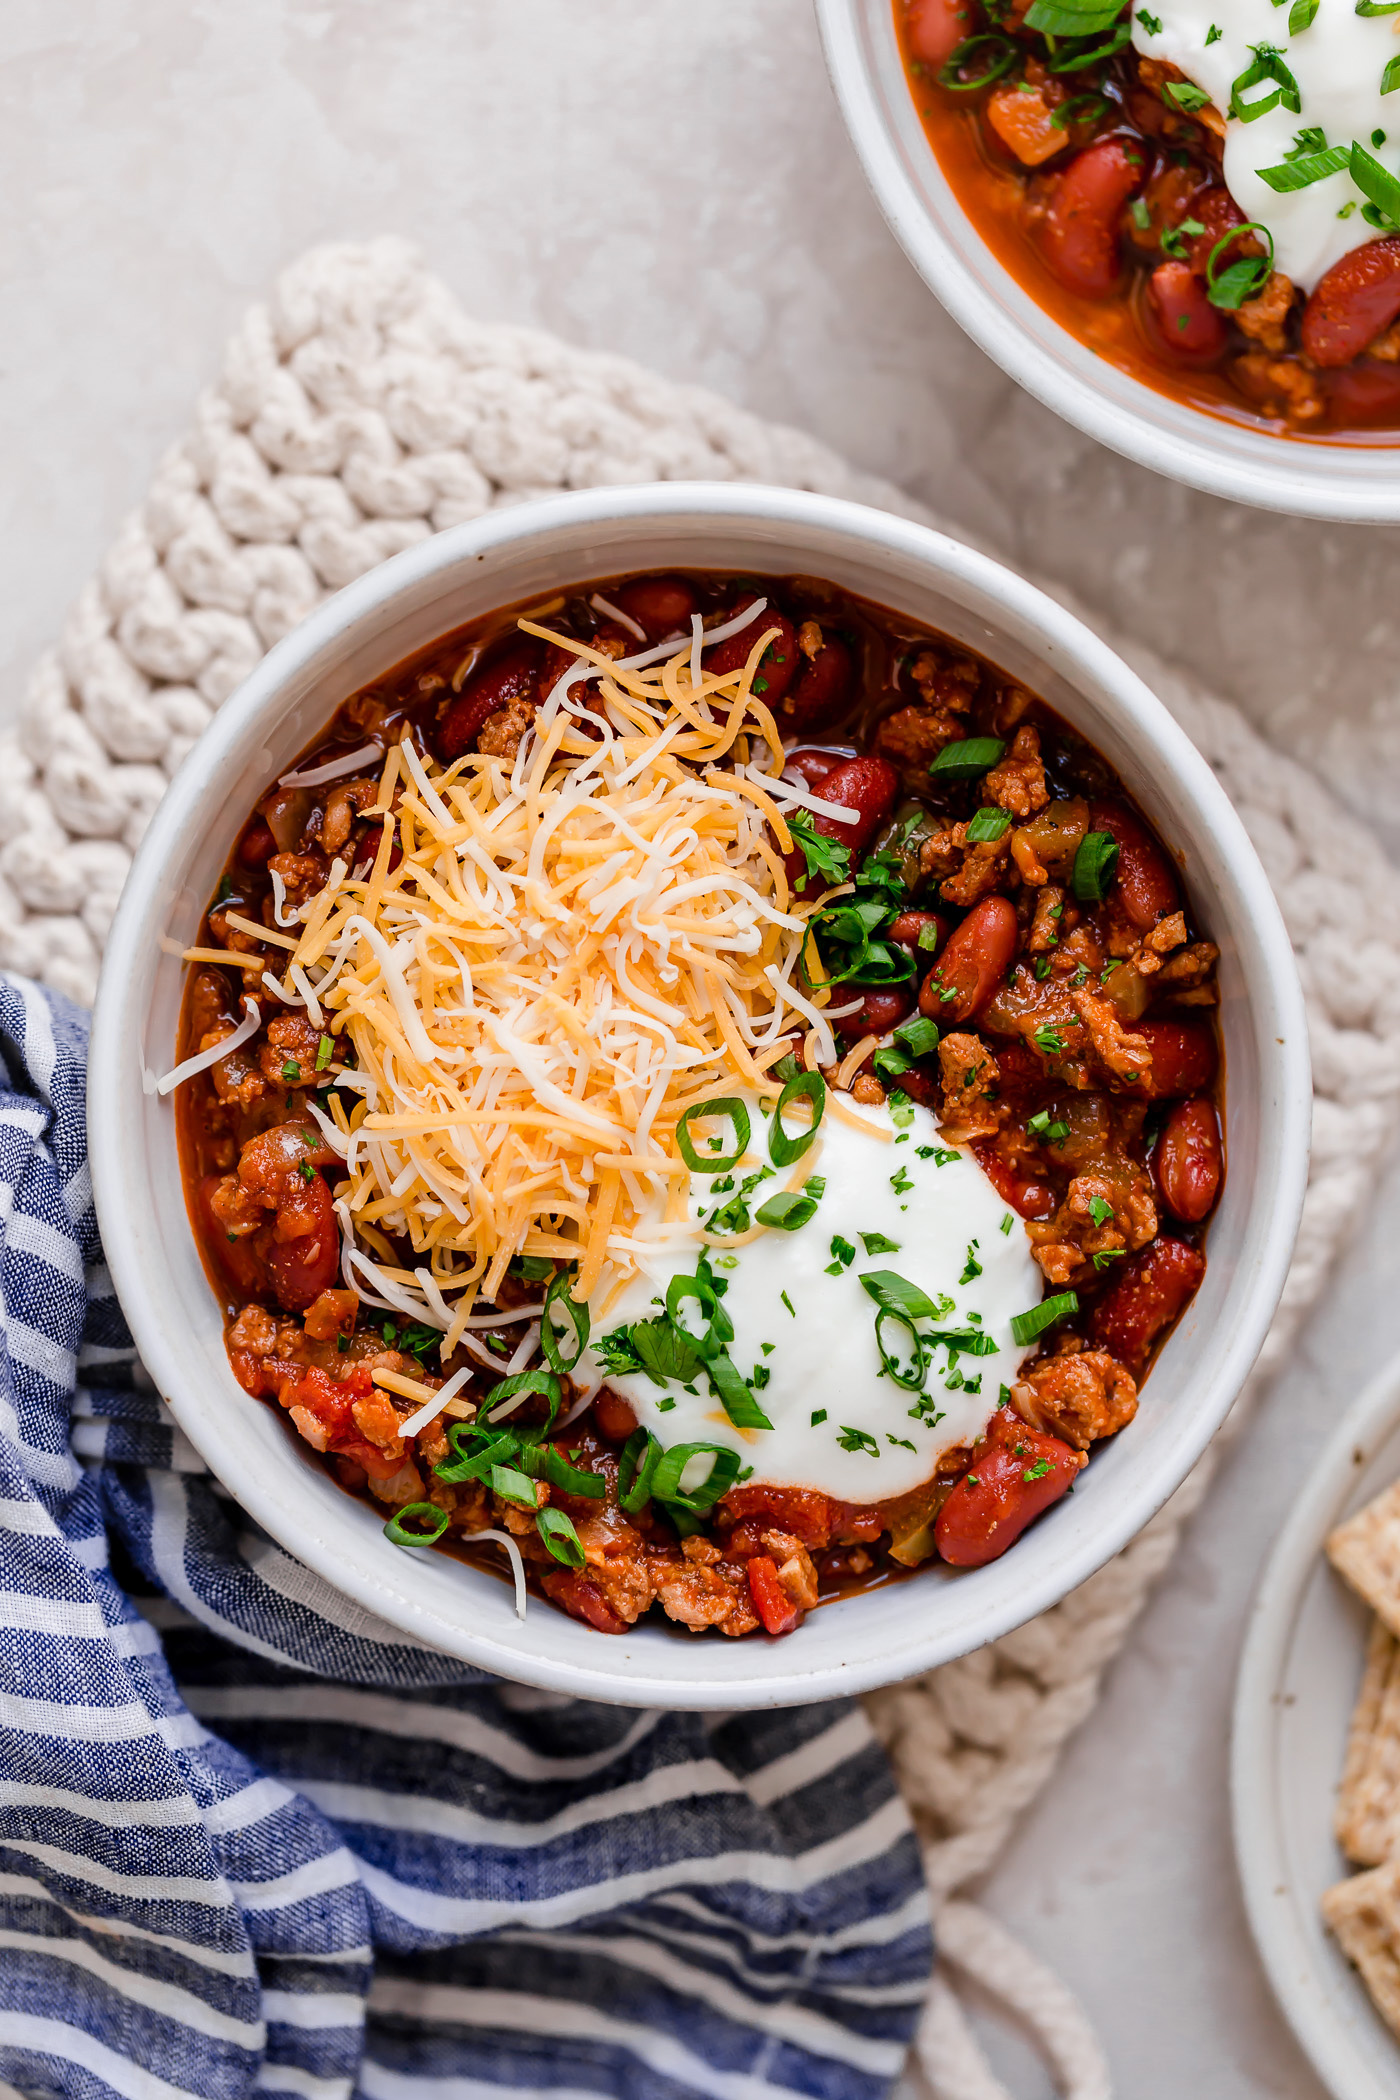 Best Turkey Chili Recipe Family Friendly - Cooking Classy